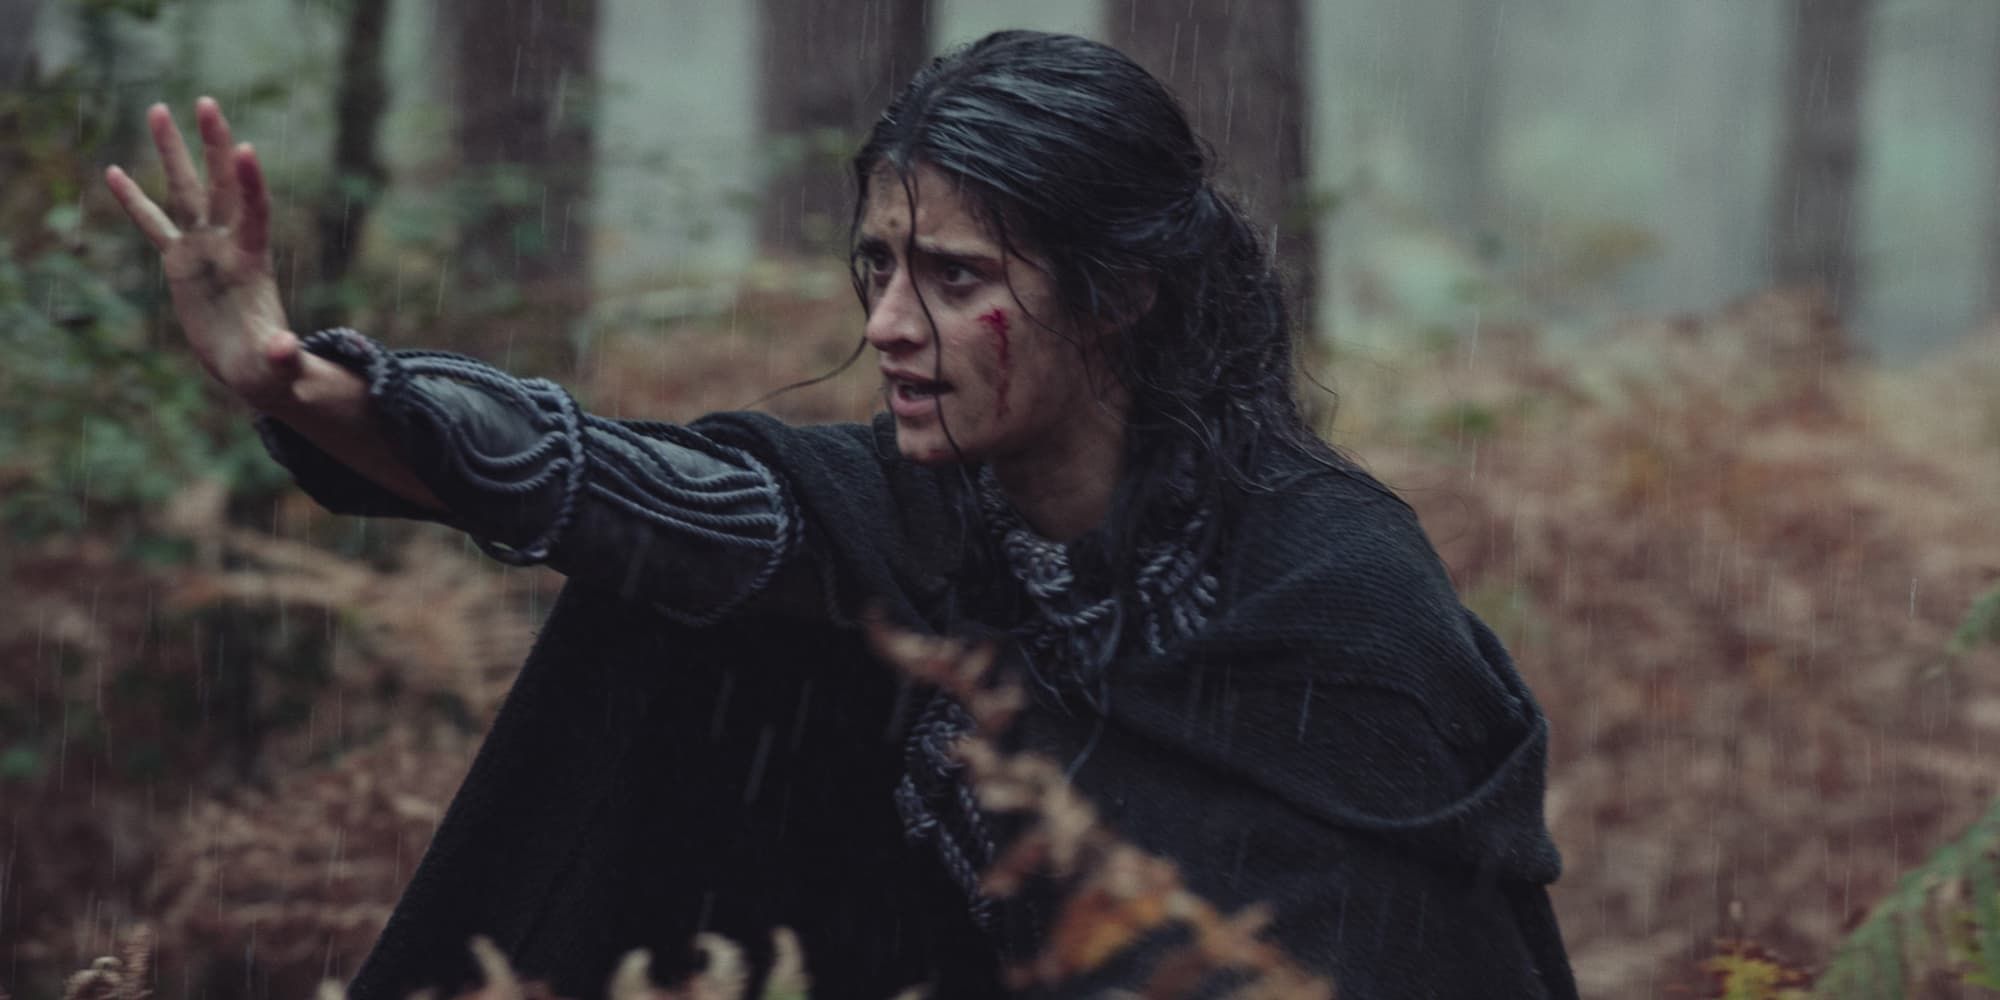 Yennefer tries to use her magic in a rainy forest